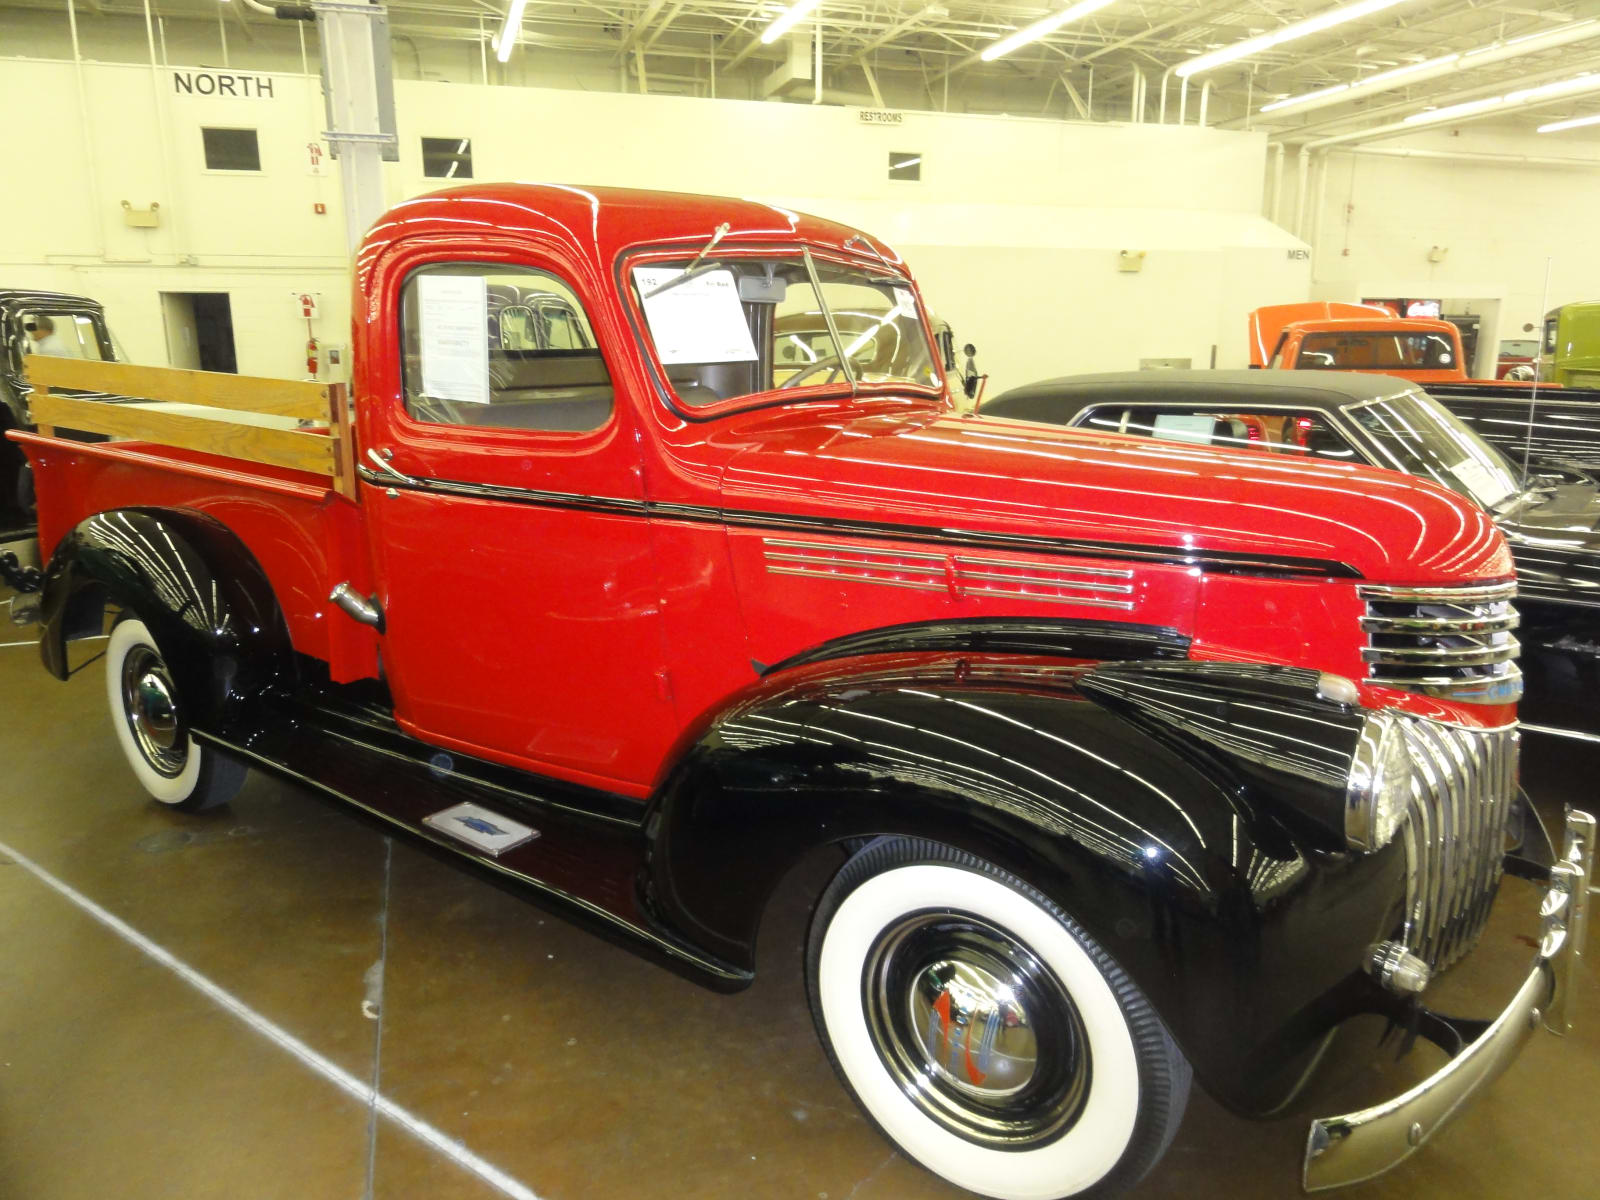 1946 Chevrolet Pickup At Houston 2012 As S15 Mecum Auctions